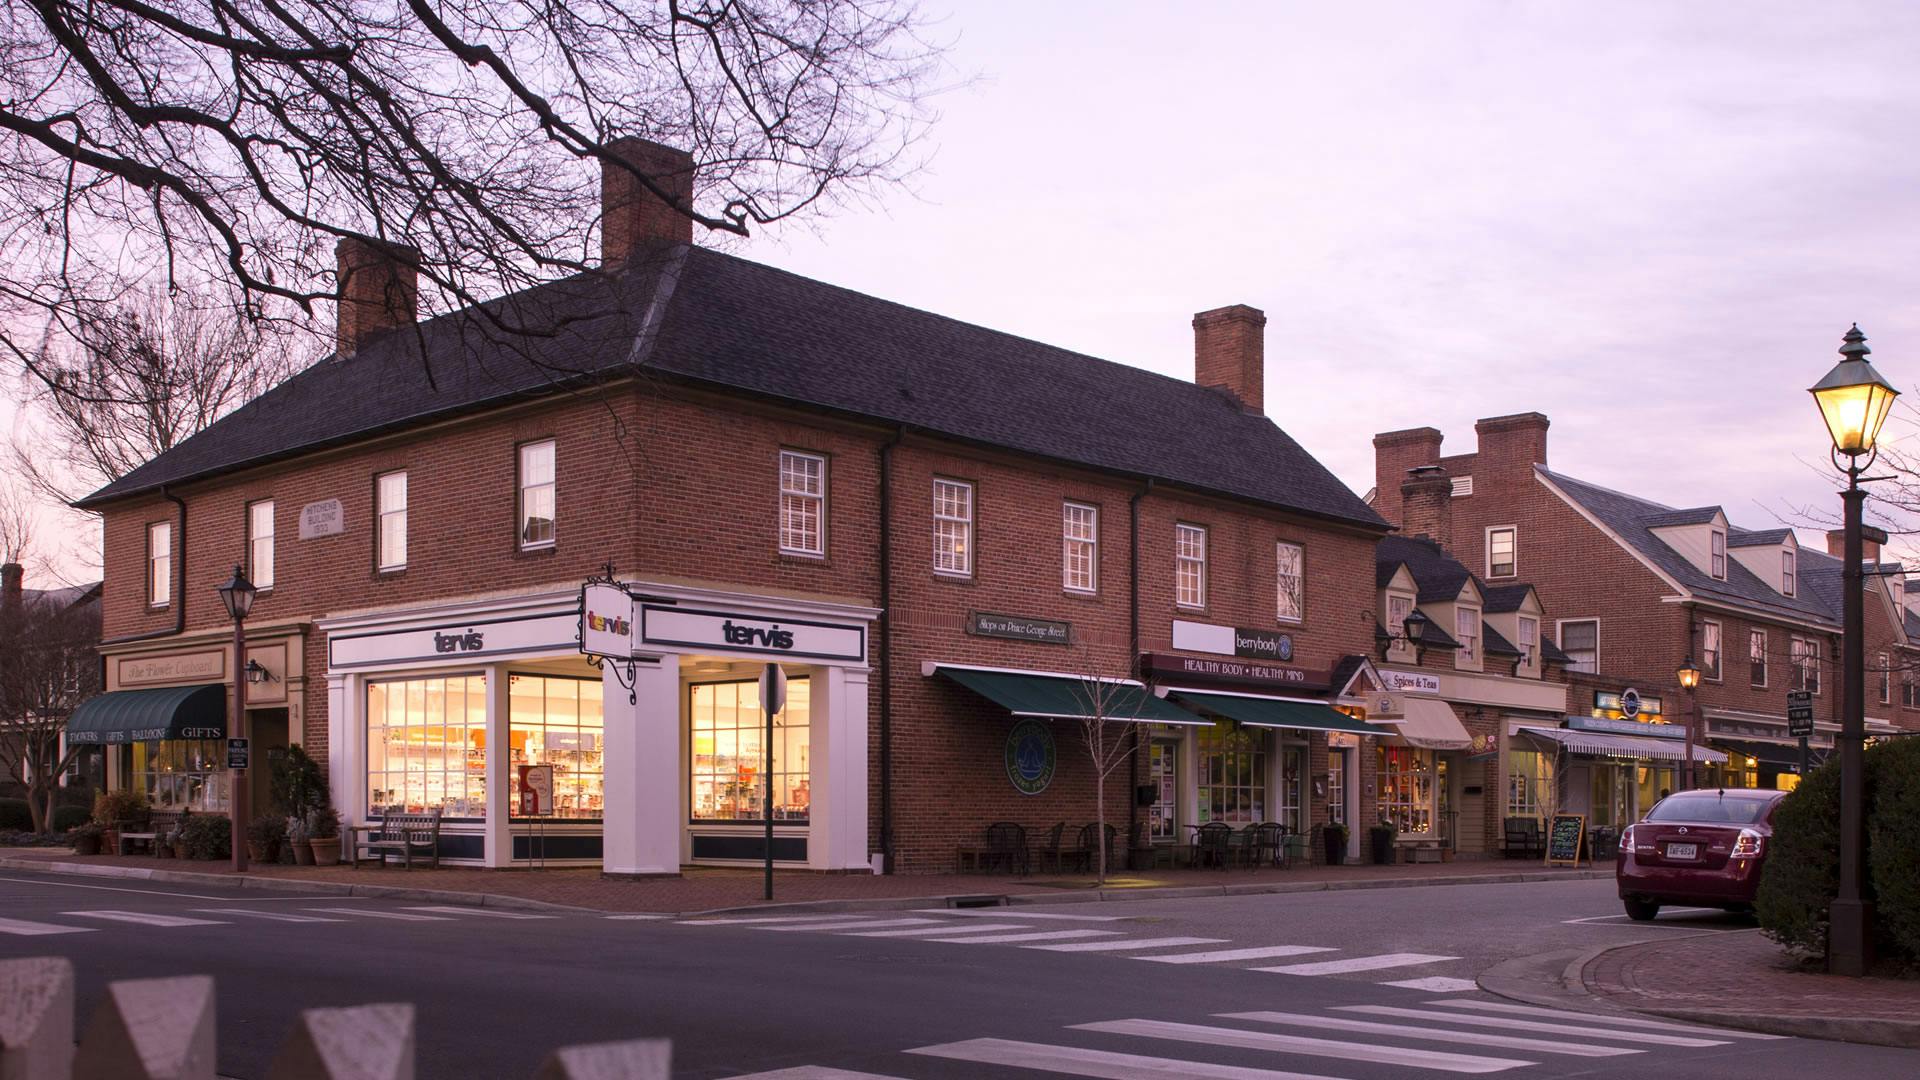 A series of colonial red brick storefront buildings with several tall chimneys.